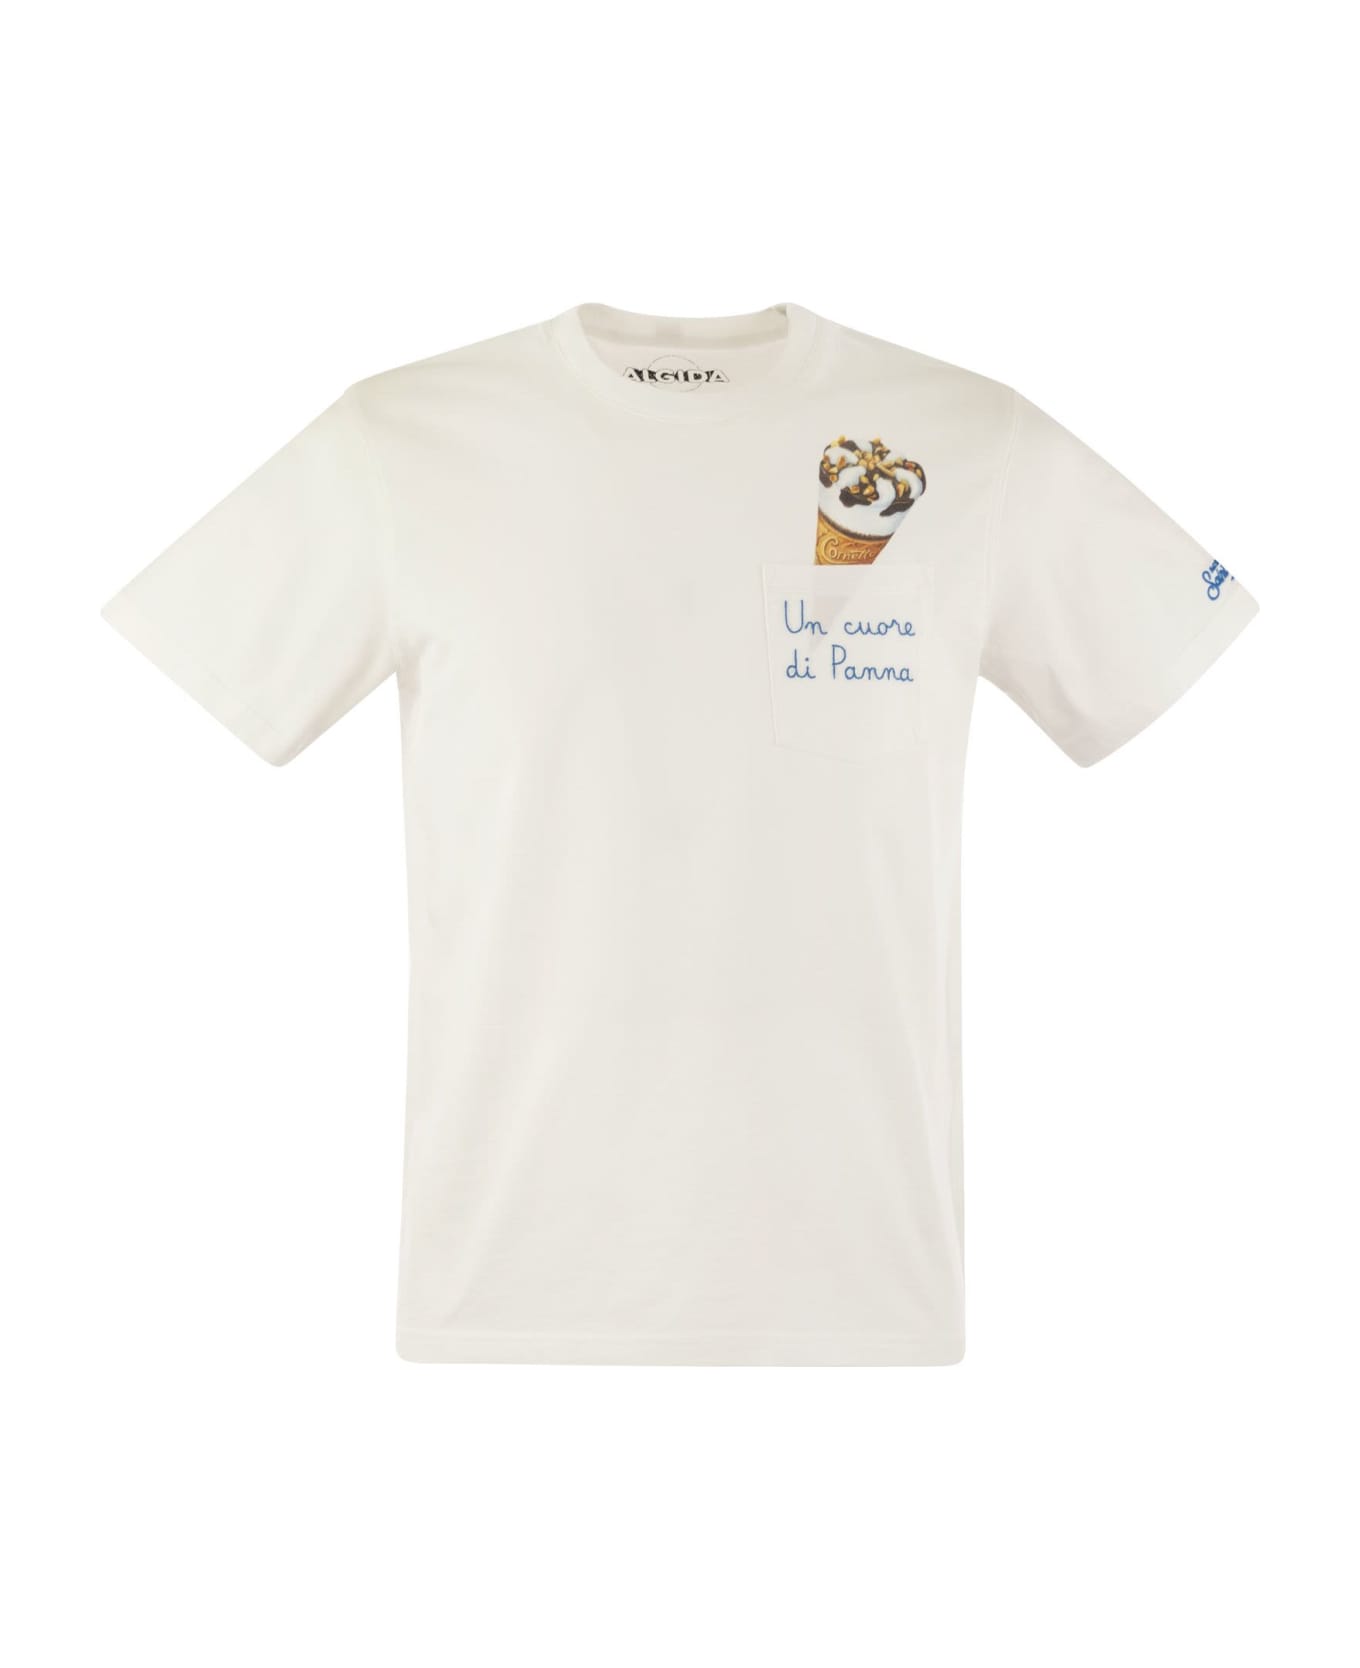 MC2 Saint Barth Austin - T-shirt With Embroidery On Chest Algida Limited Edition - White シャツ